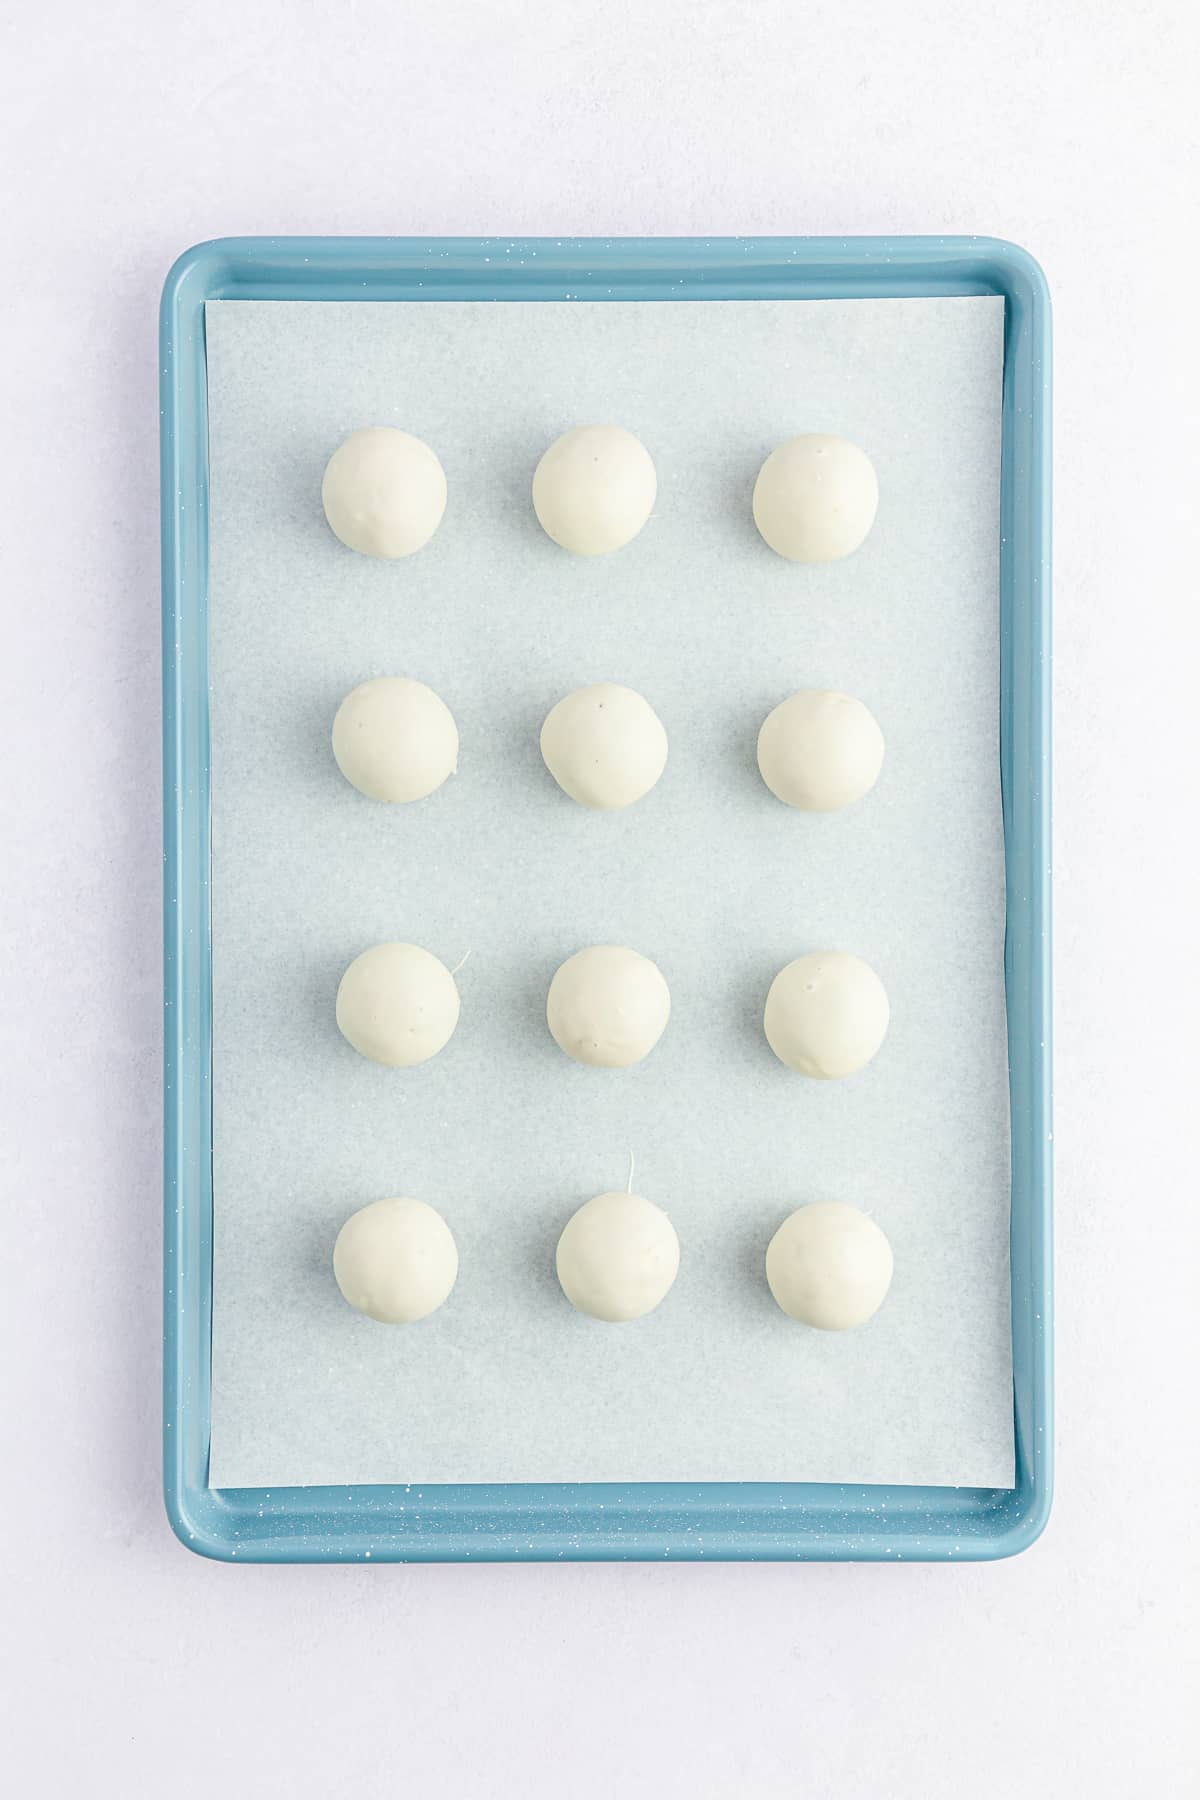 White chocolate dipped Carrot Cake Balls on cookie sheet.